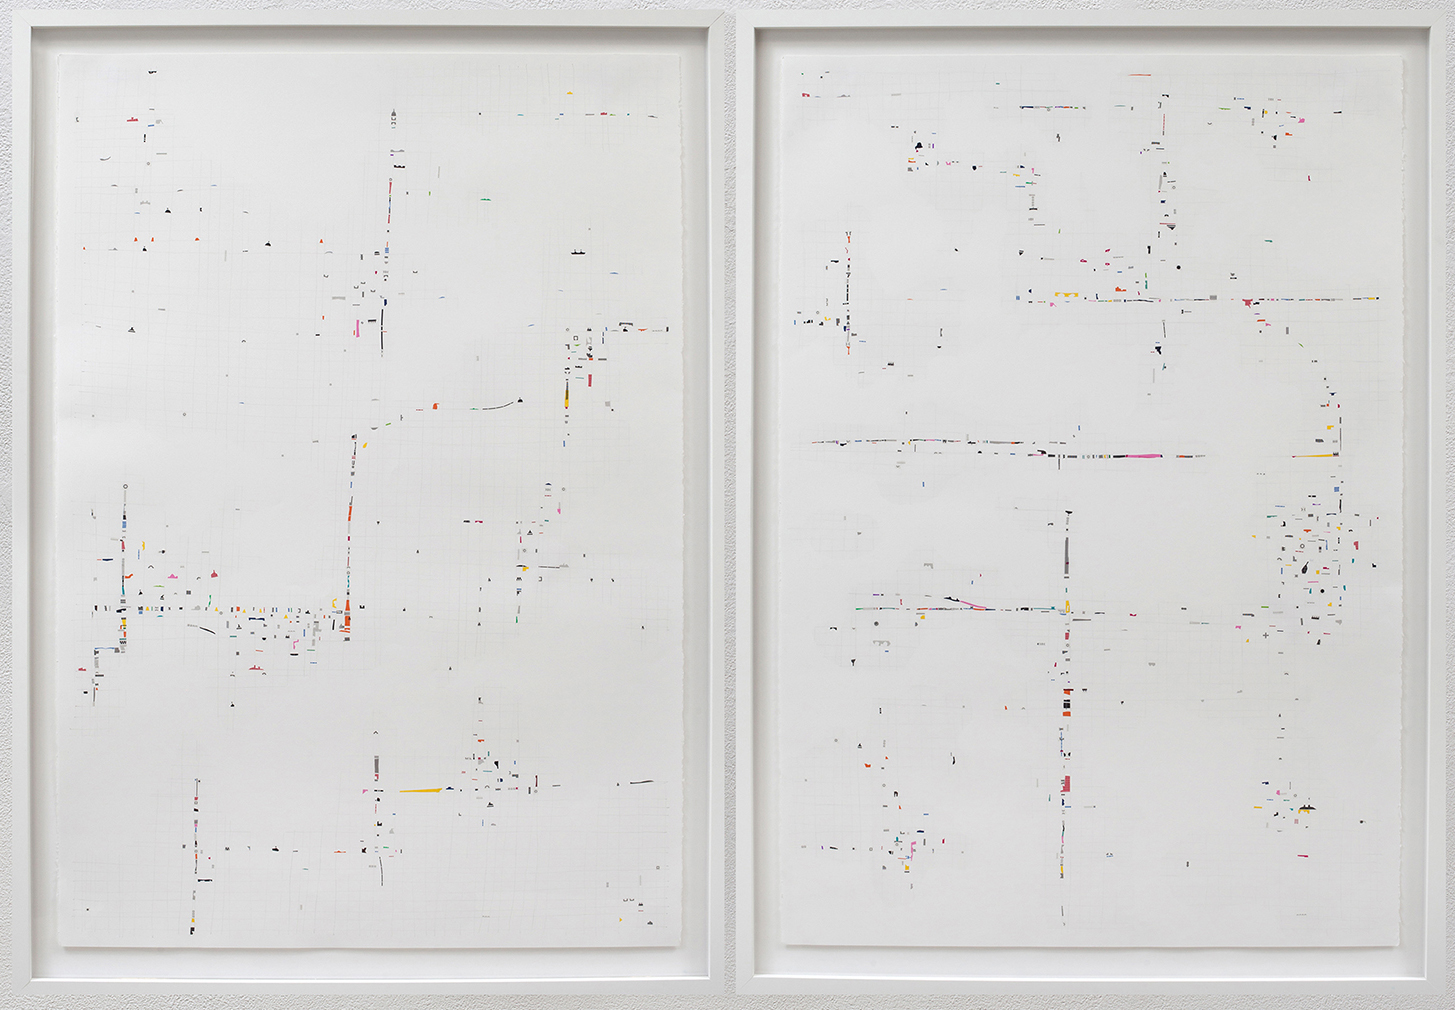   Scene One and Scene Two,  2015, linetape on paper, 44 x 60 inches 